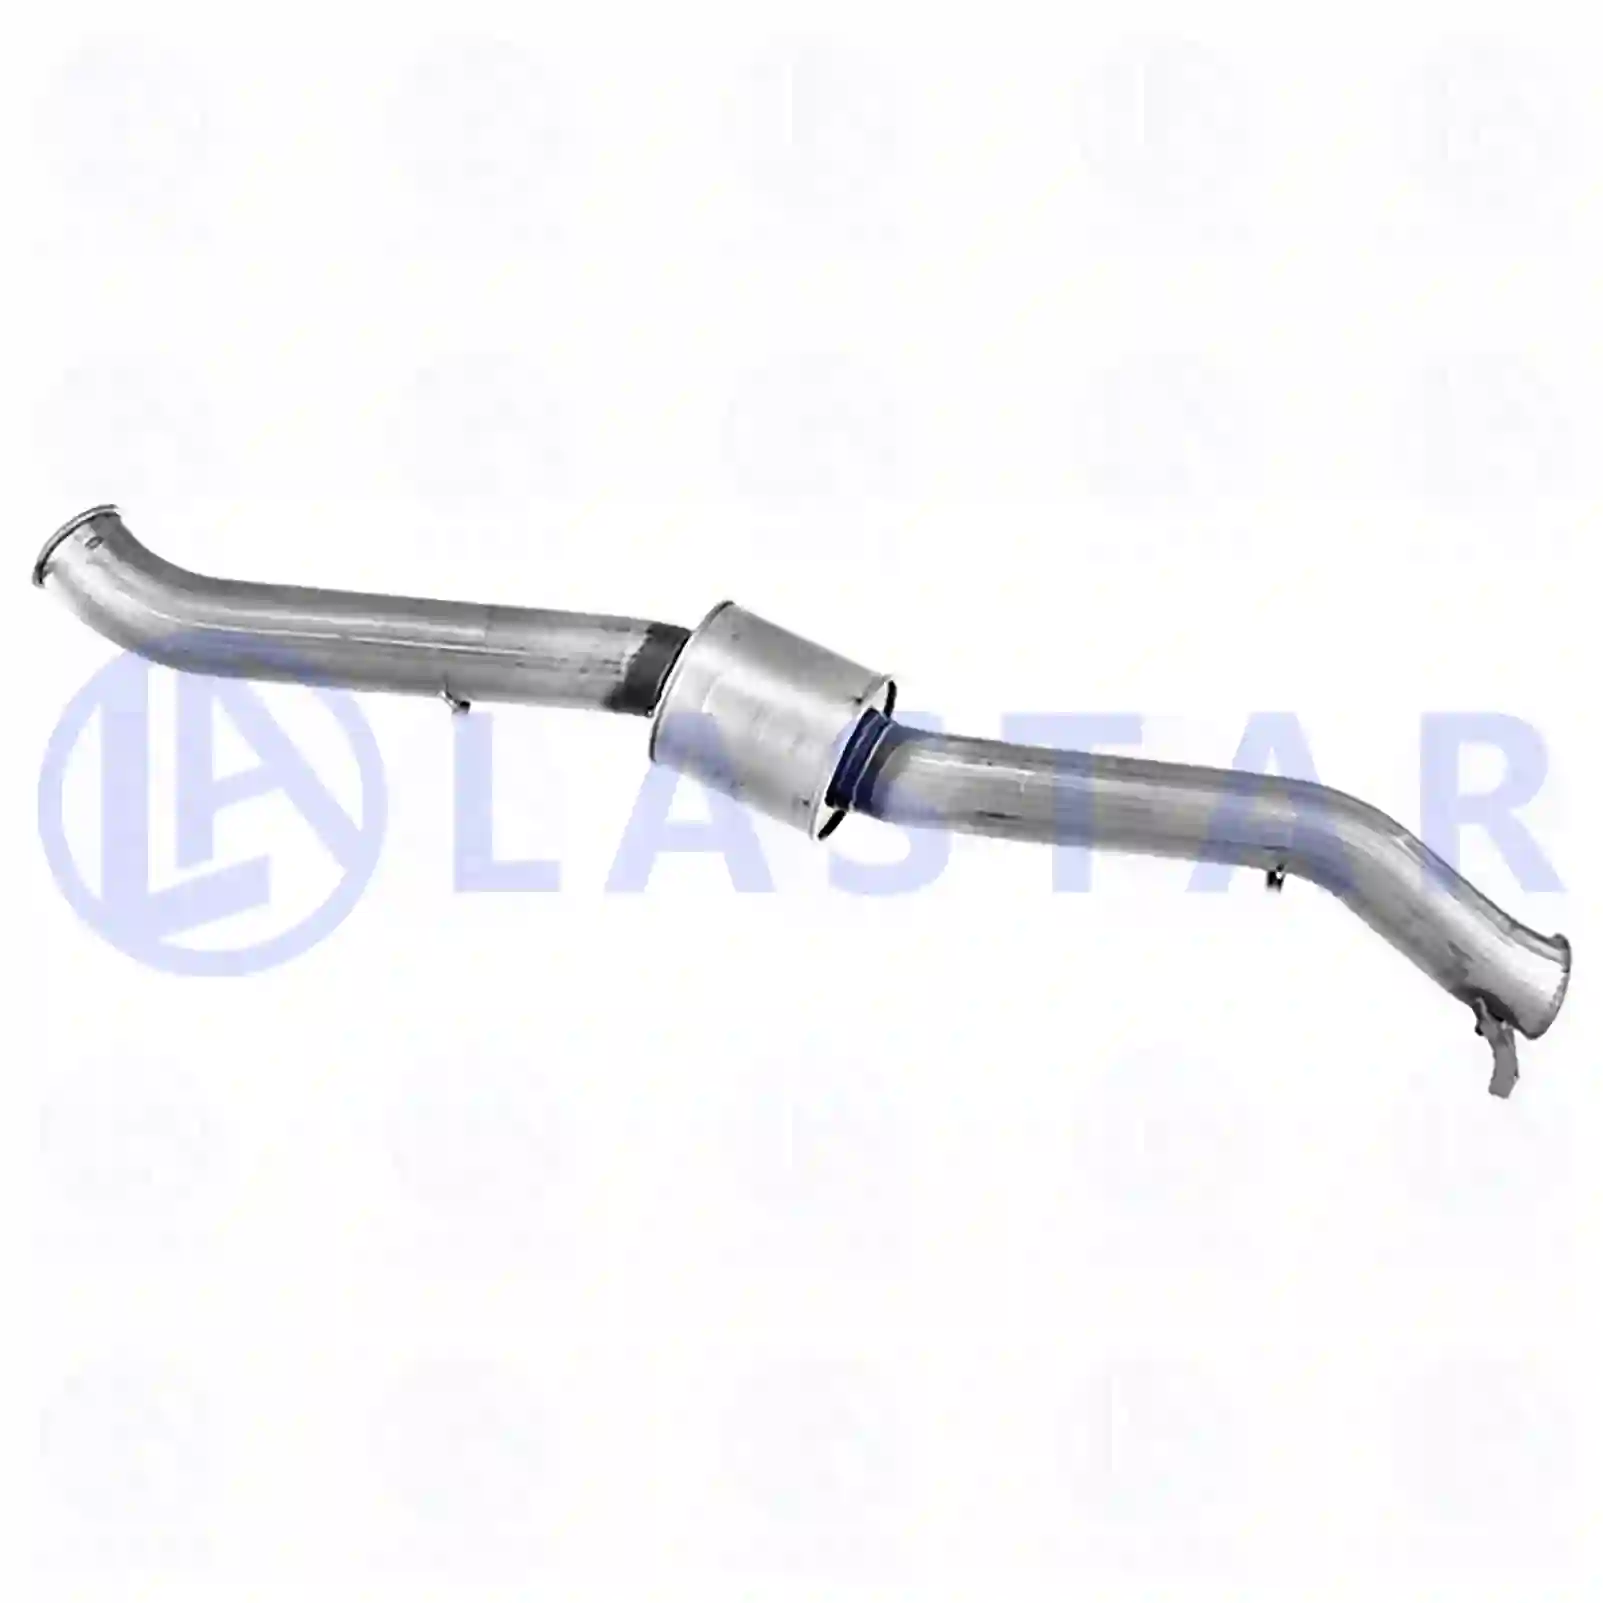 End pipe, 77707011, 1405350, 148328 ||  77707011 Lastar Spare Part | Truck Spare Parts, Auotomotive Spare Parts End pipe, 77707011, 1405350, 148328 ||  77707011 Lastar Spare Part | Truck Spare Parts, Auotomotive Spare Parts